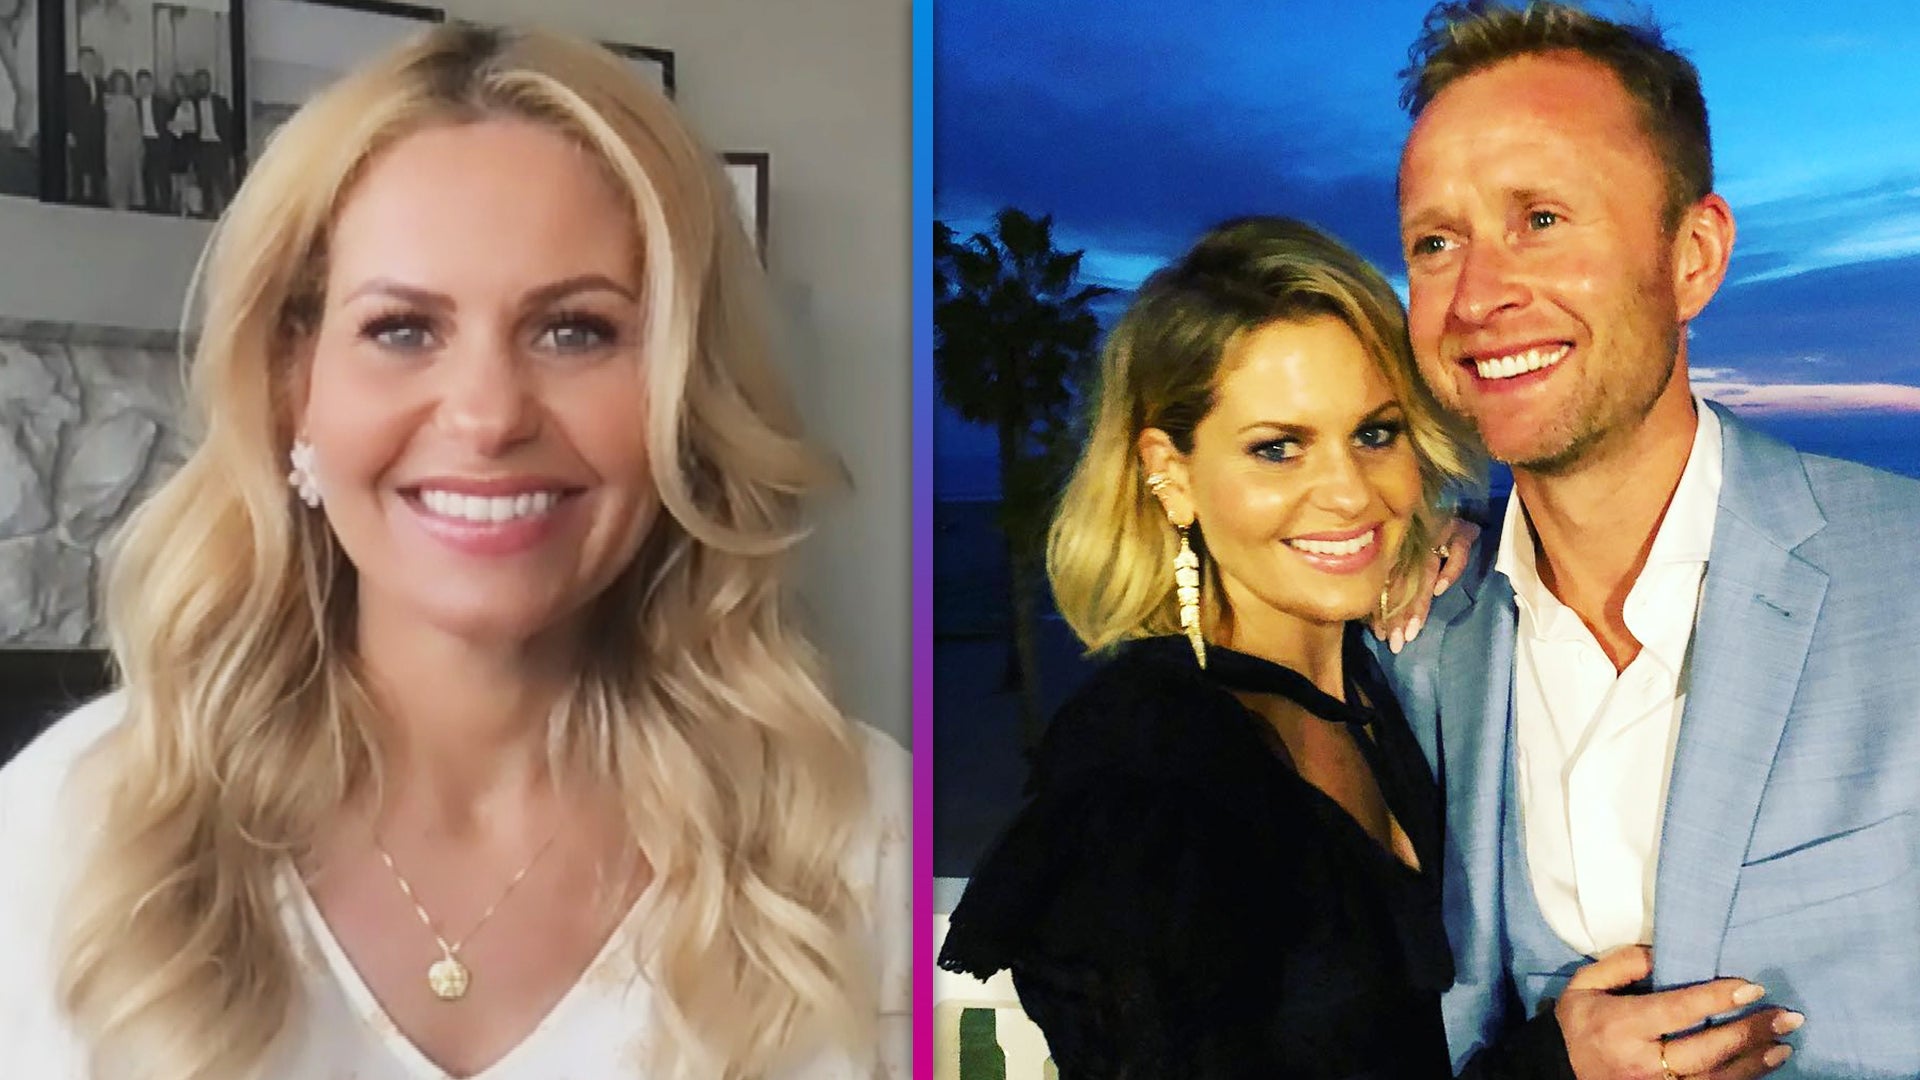 What to Know About Candace Cameron's Husband, Val Bure, and 3 Kids,  Natasha, Lev, and Maksim